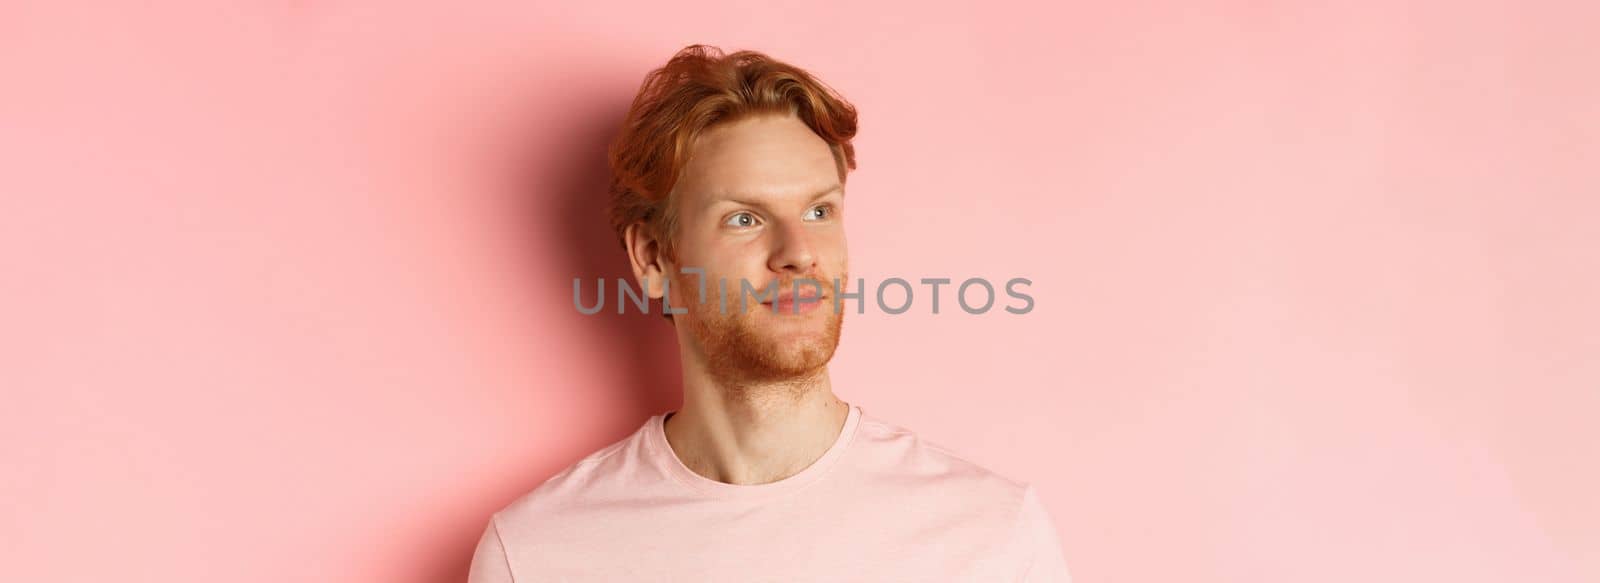 Handsome european male model with red hair and beard, turn head and looking pleased at copy space on left side, standing over pink background.